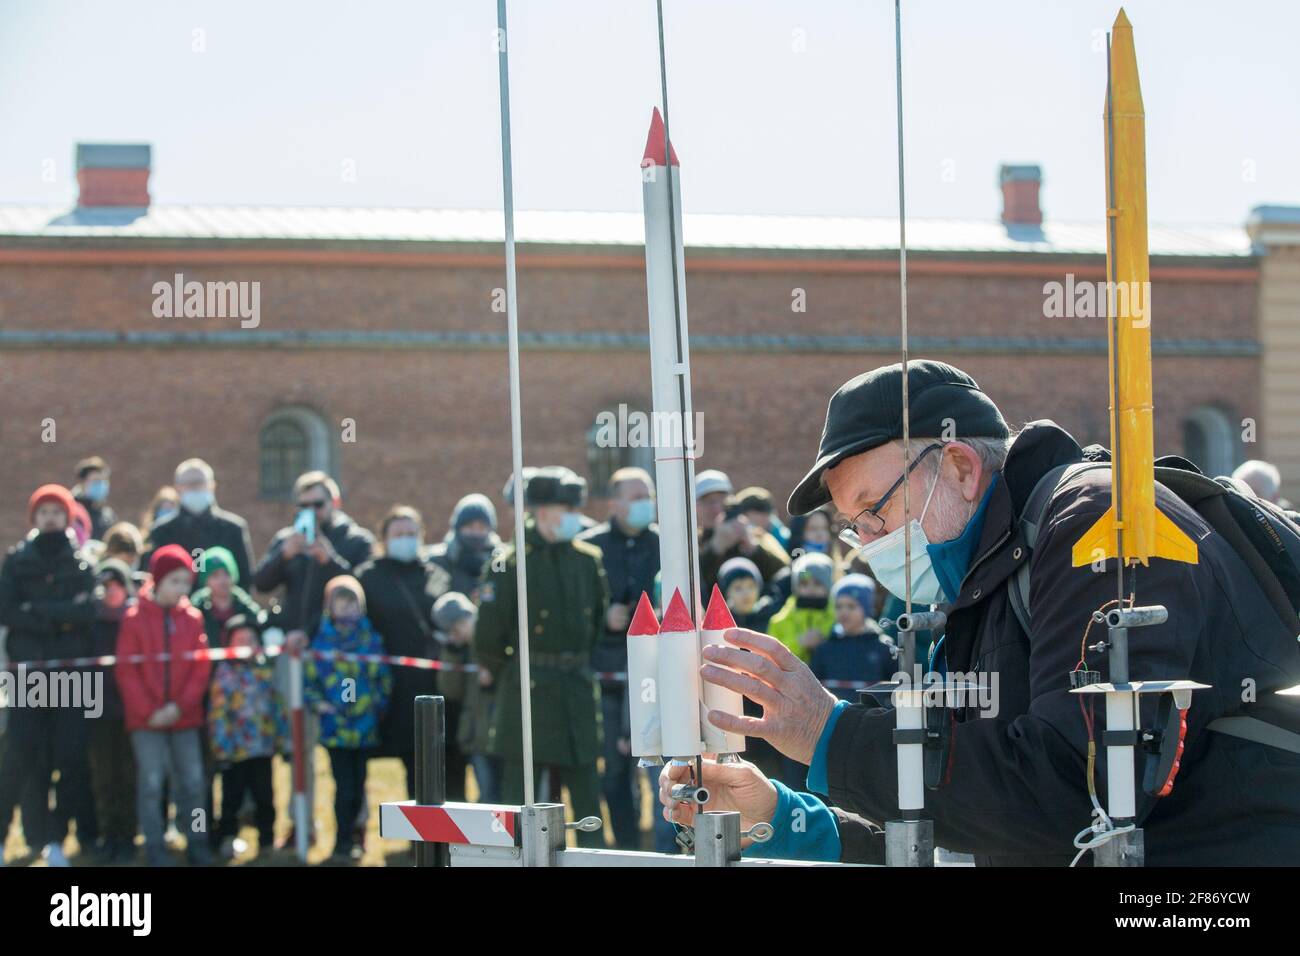 St. Petersburg, Russia. 11th Apr, 2021. A rocket enthusiast launches his self-made rocket models in commemoration of the 60th anniversary of the first human space flight in St. Petersburg, Russia, April 11, 2021. Credit: Irina Motina/Xinhua/Alamy Live News Stock Photo